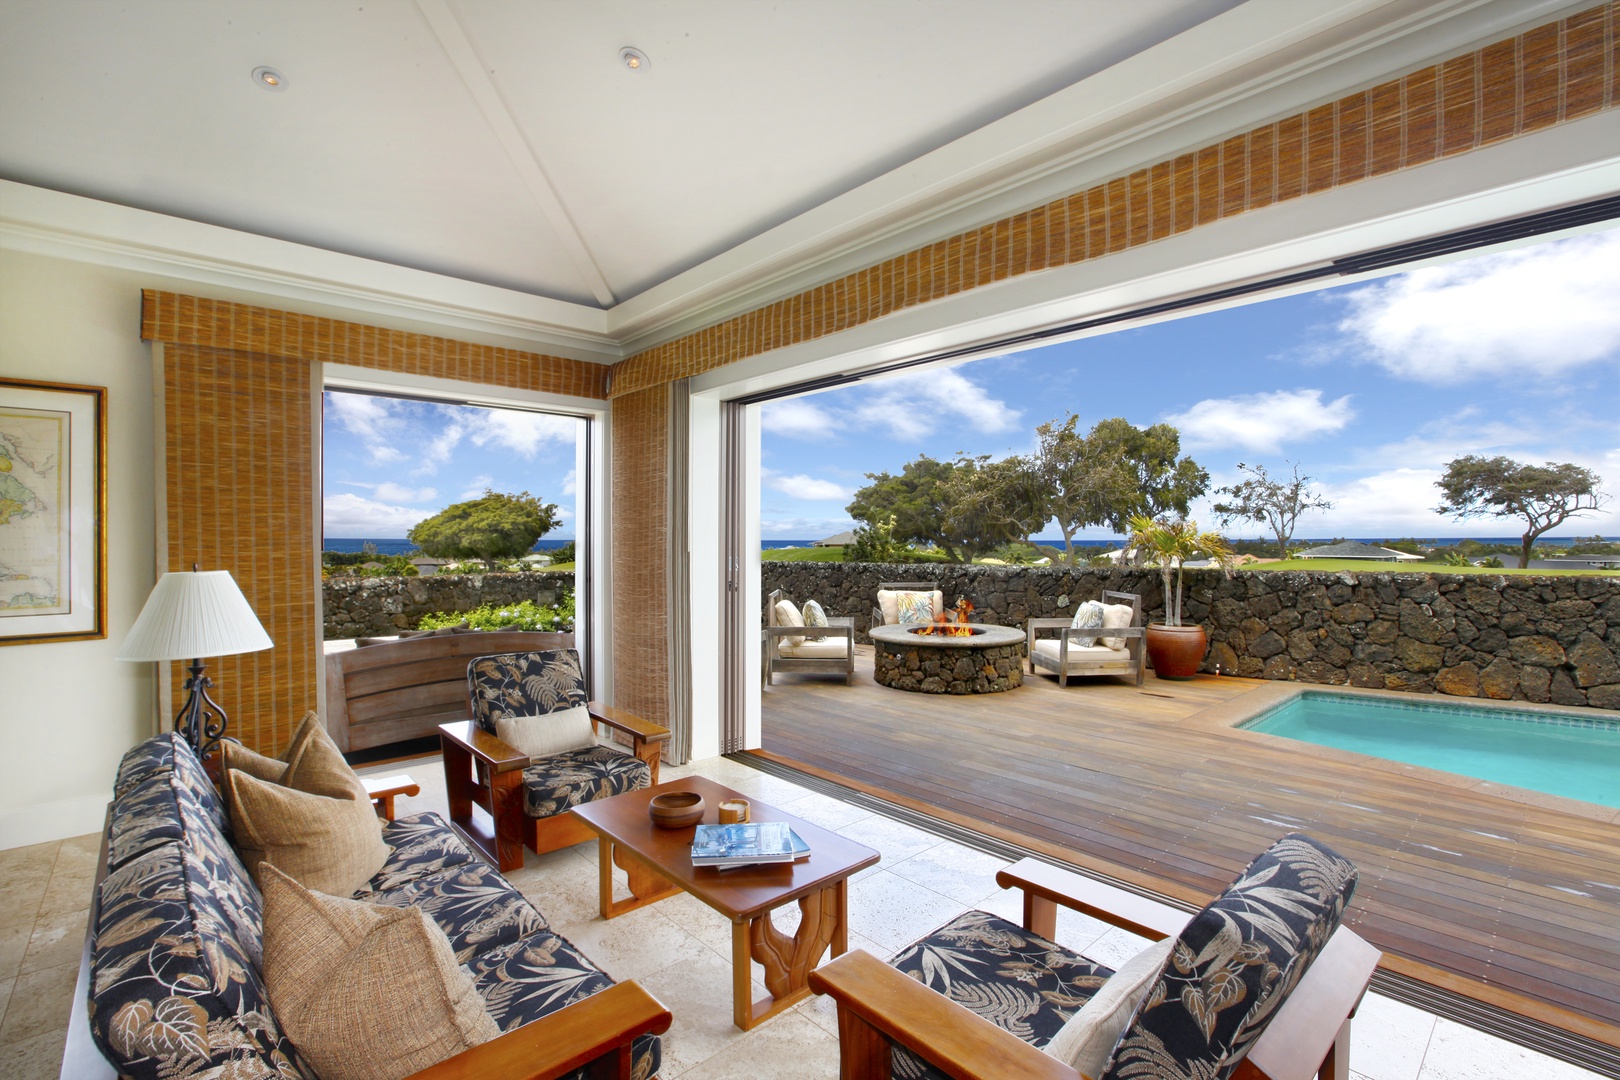 Koloa Vacation Rentals, Hale Luana at Poipu - Living Room with Pool and Ocean Views